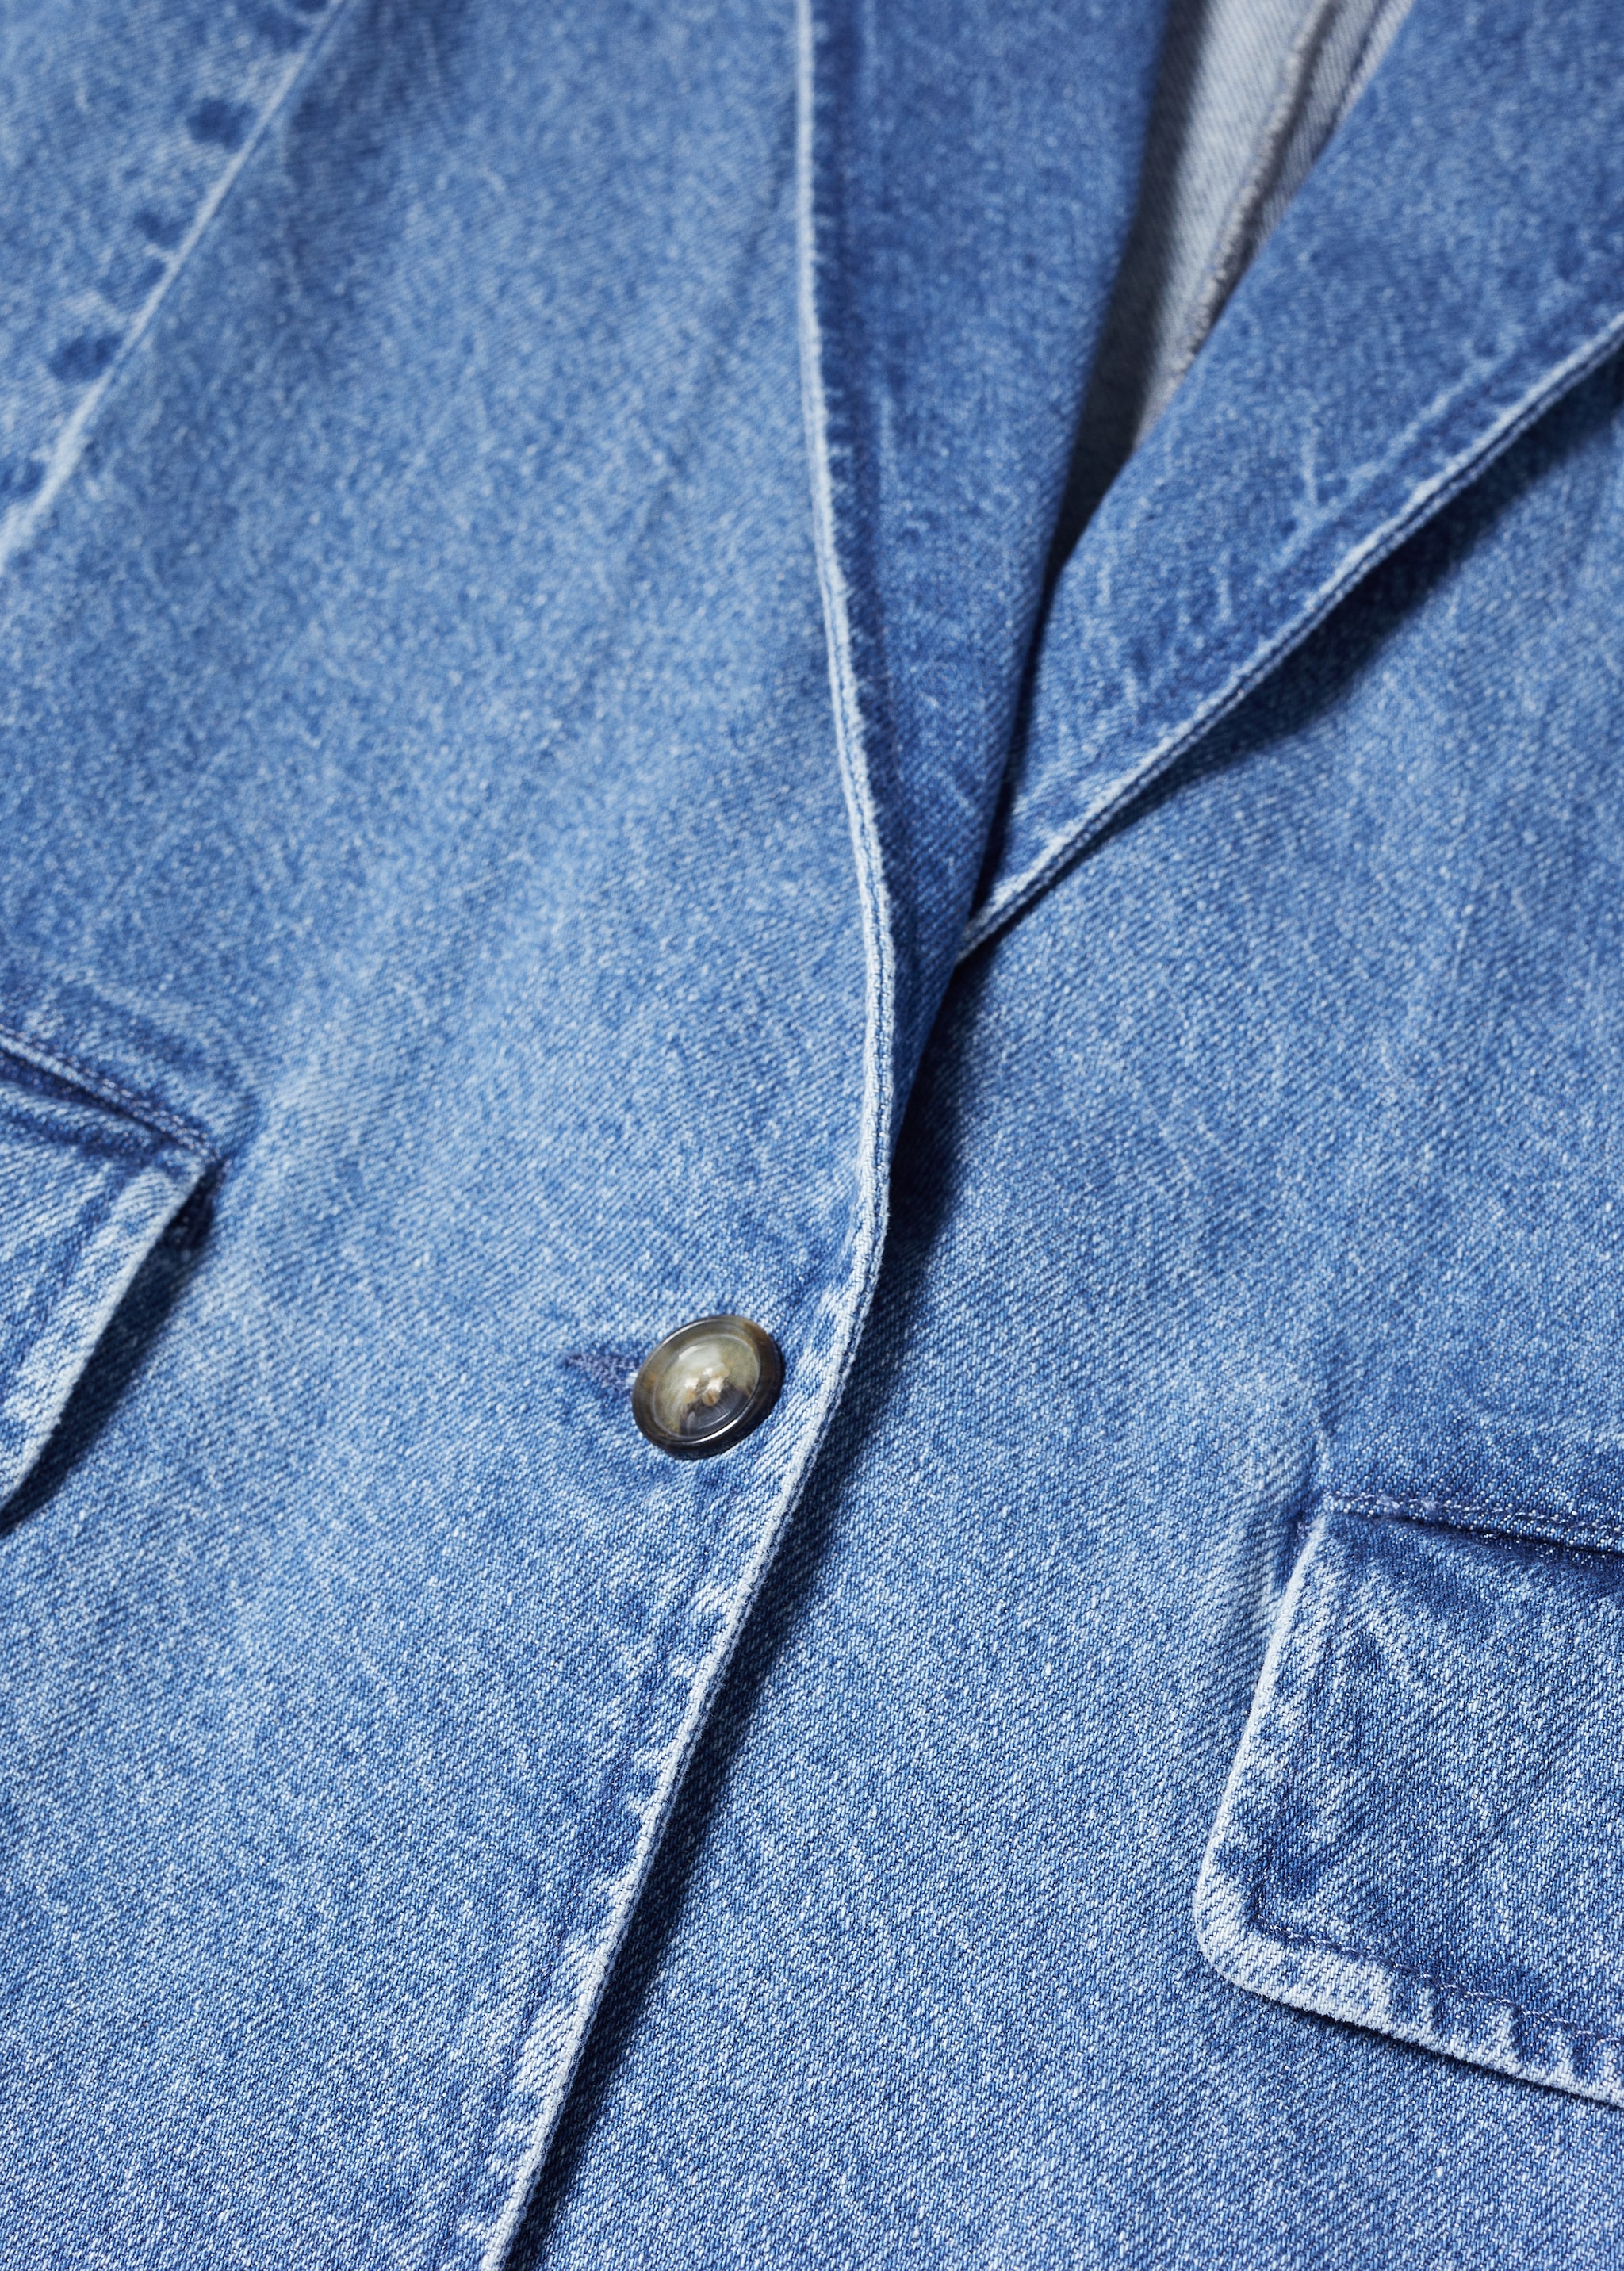 Denim jacket with pockets - Details of the article 8